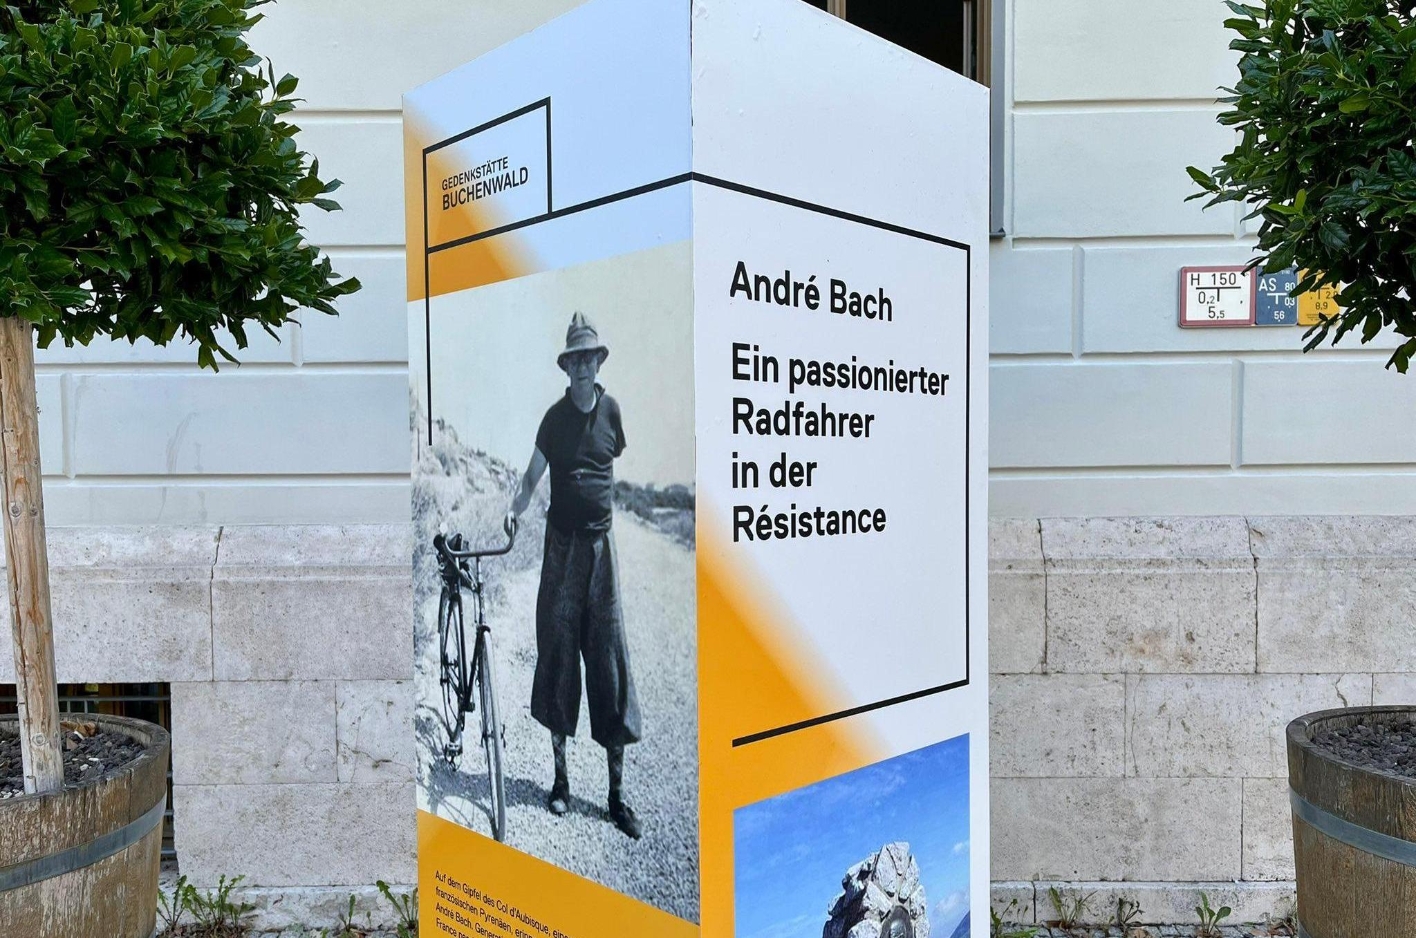 2 sides of a cuboid white-orange info-stele on which is a picture of a man next to his bicycle. On another side the information is offered that it is the member of the Resistance André Bach.